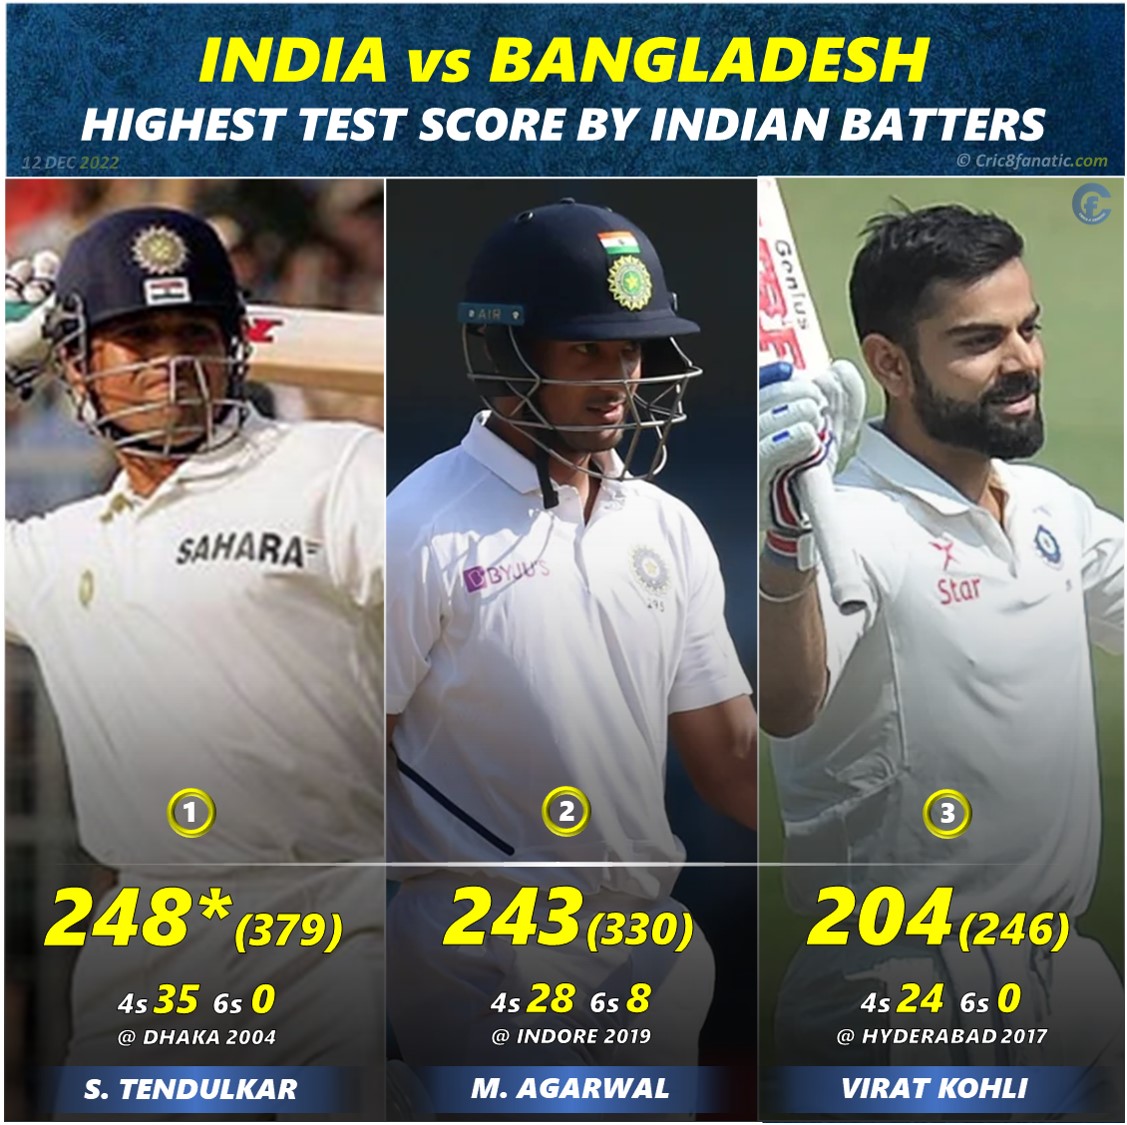 highest score by india batters vs bangladesh test matches